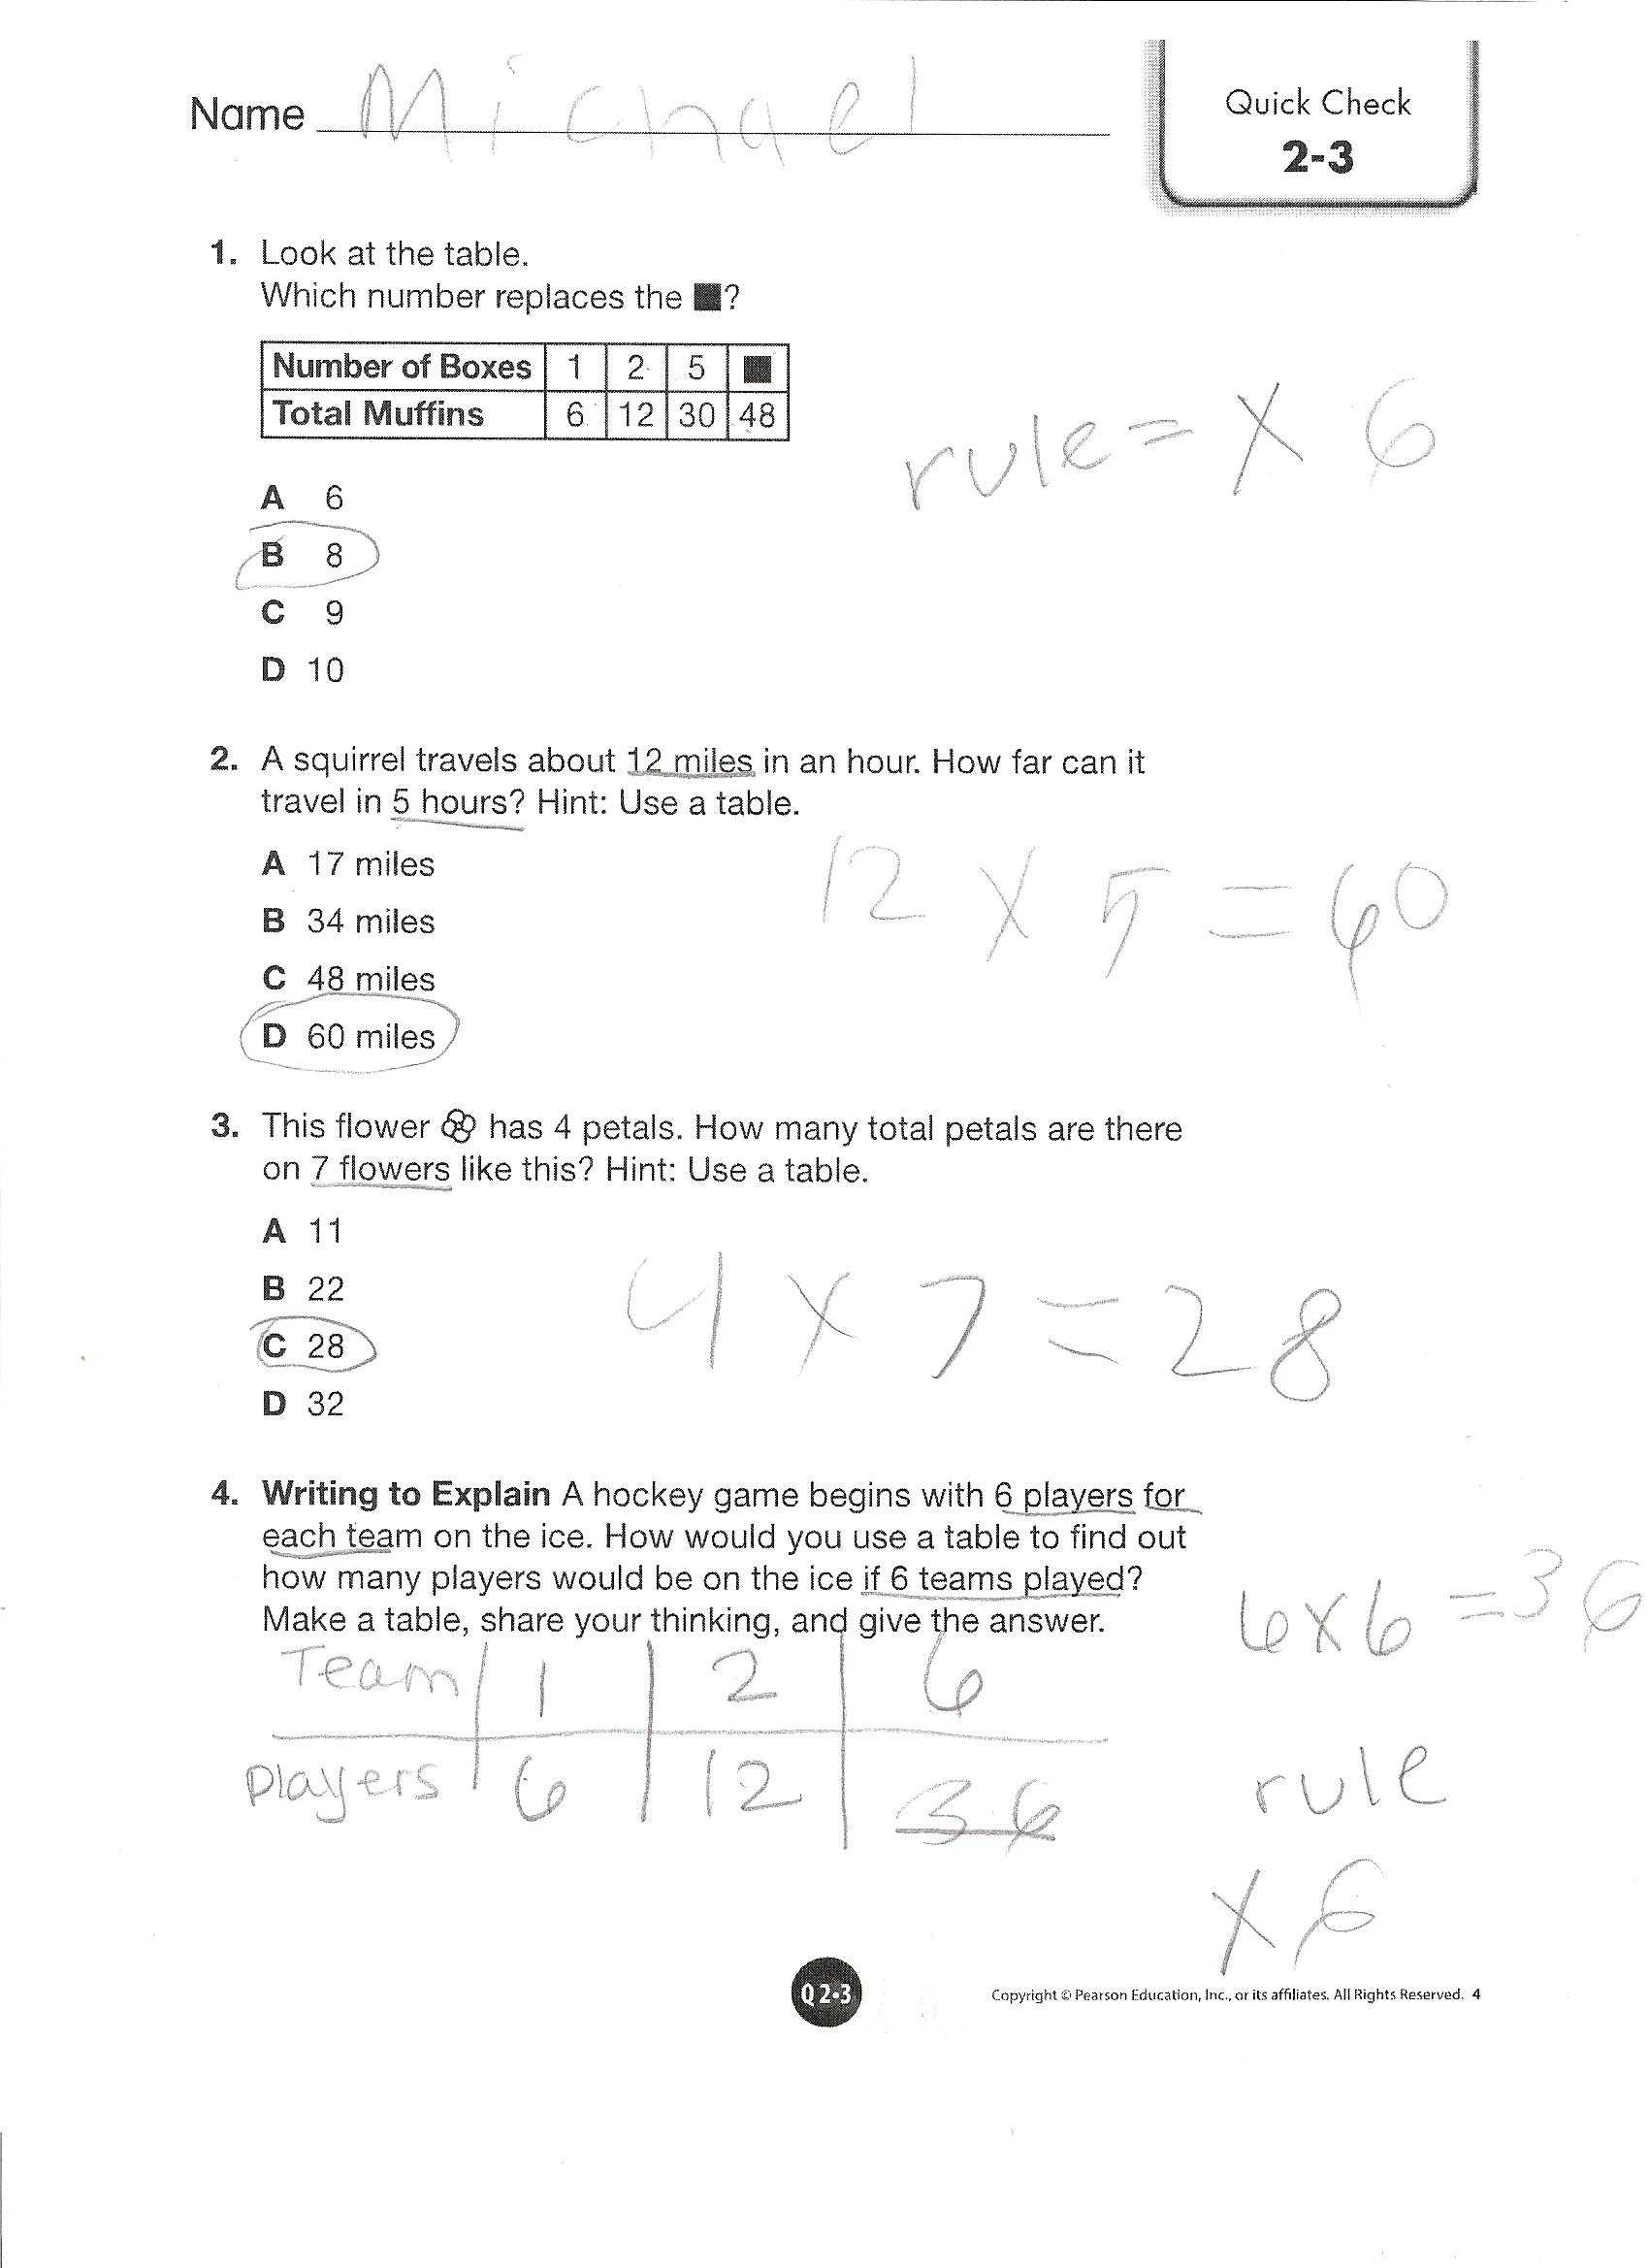 Food Inc Movie Worksheet Answer Key together with Pearson Education Math Worksheets Answers 3rd Grade